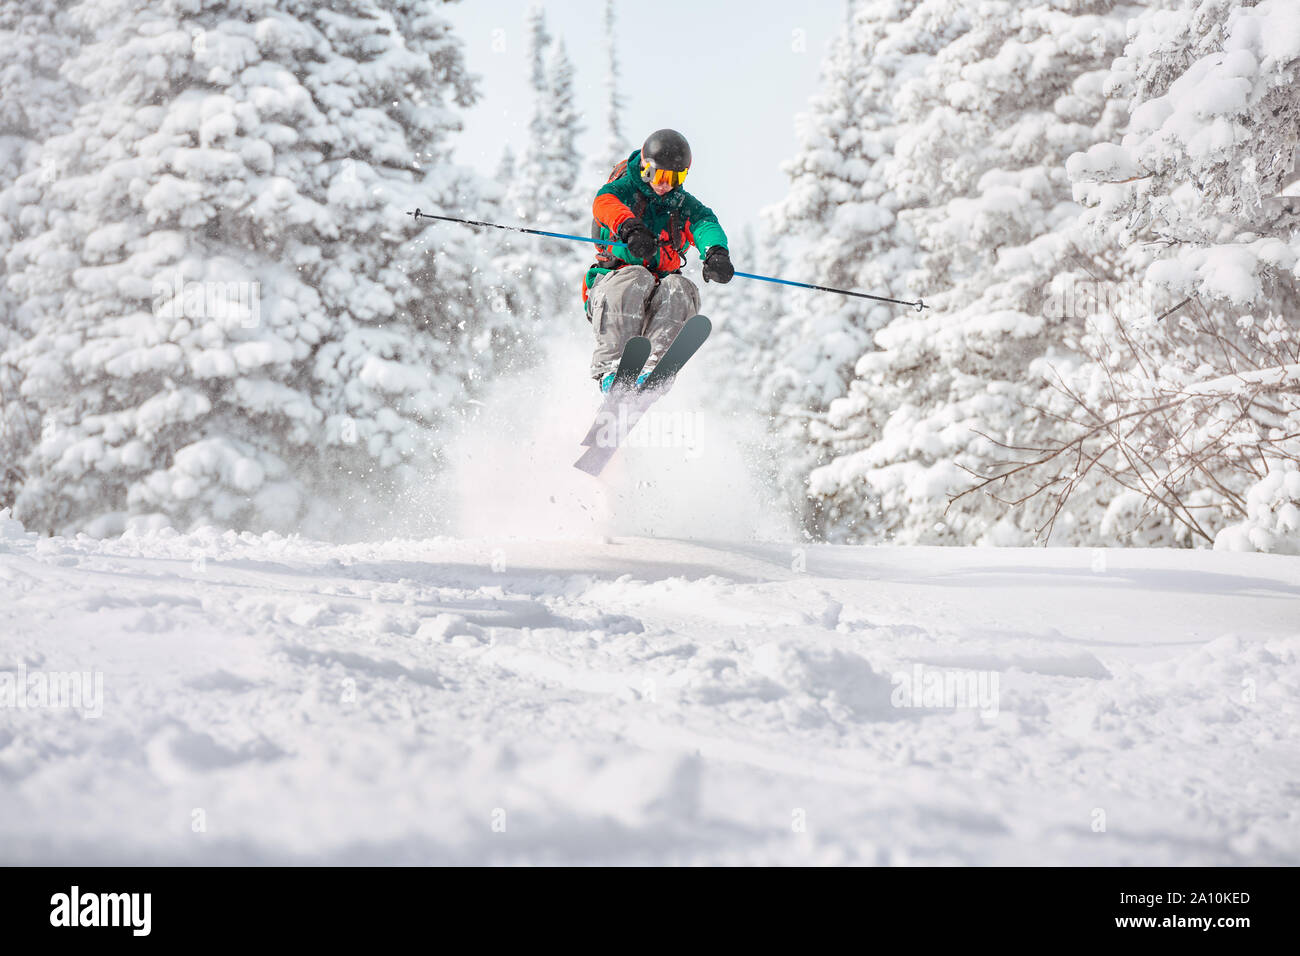 Fast skier freerides and jumps in snowy forest. Offpiste skiing concept Stock Photo